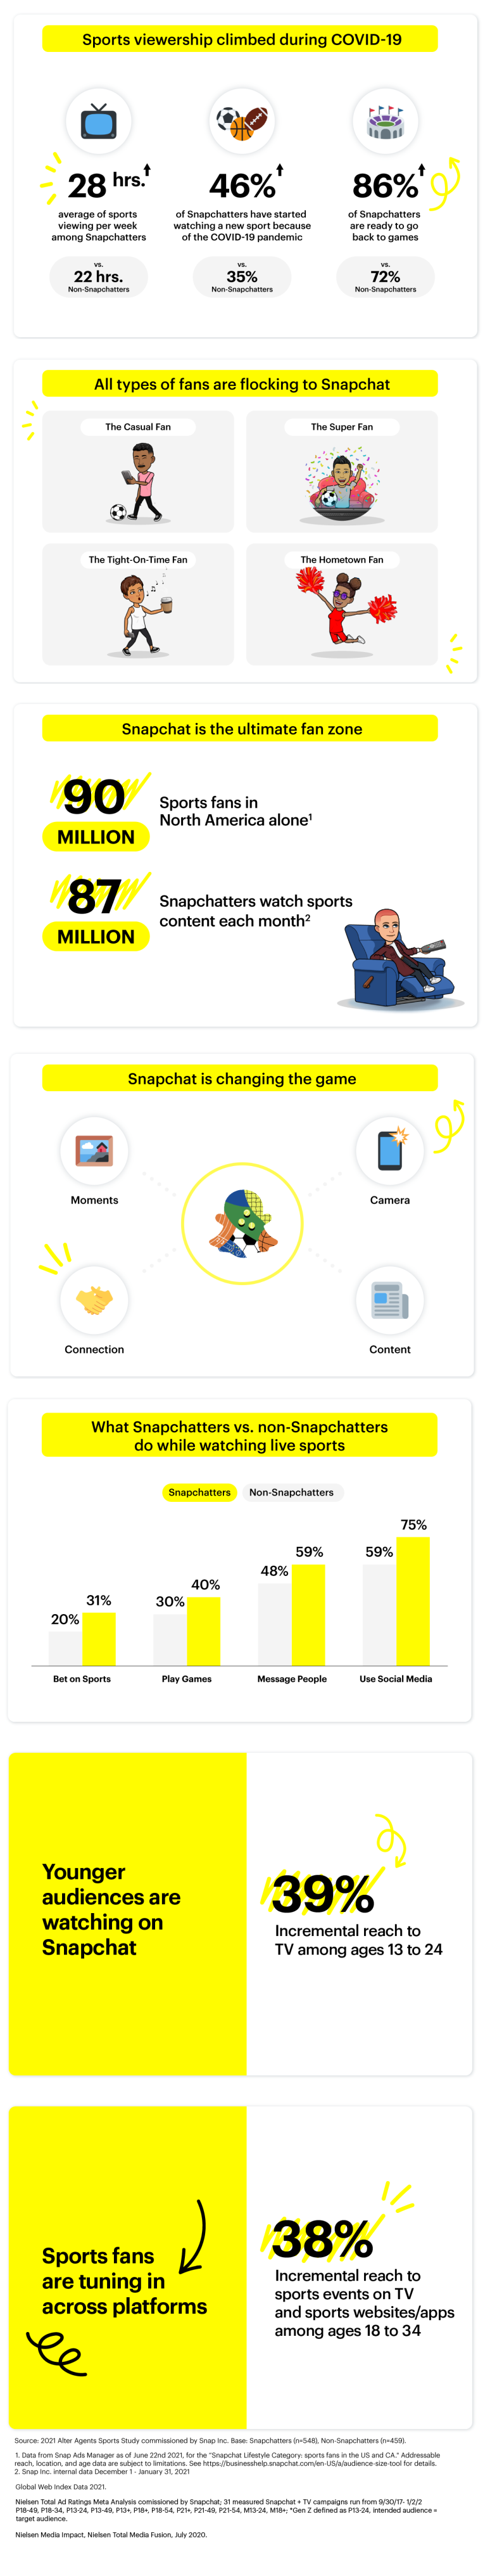 snapchat shares new insights into sports engagement among snap users infographic